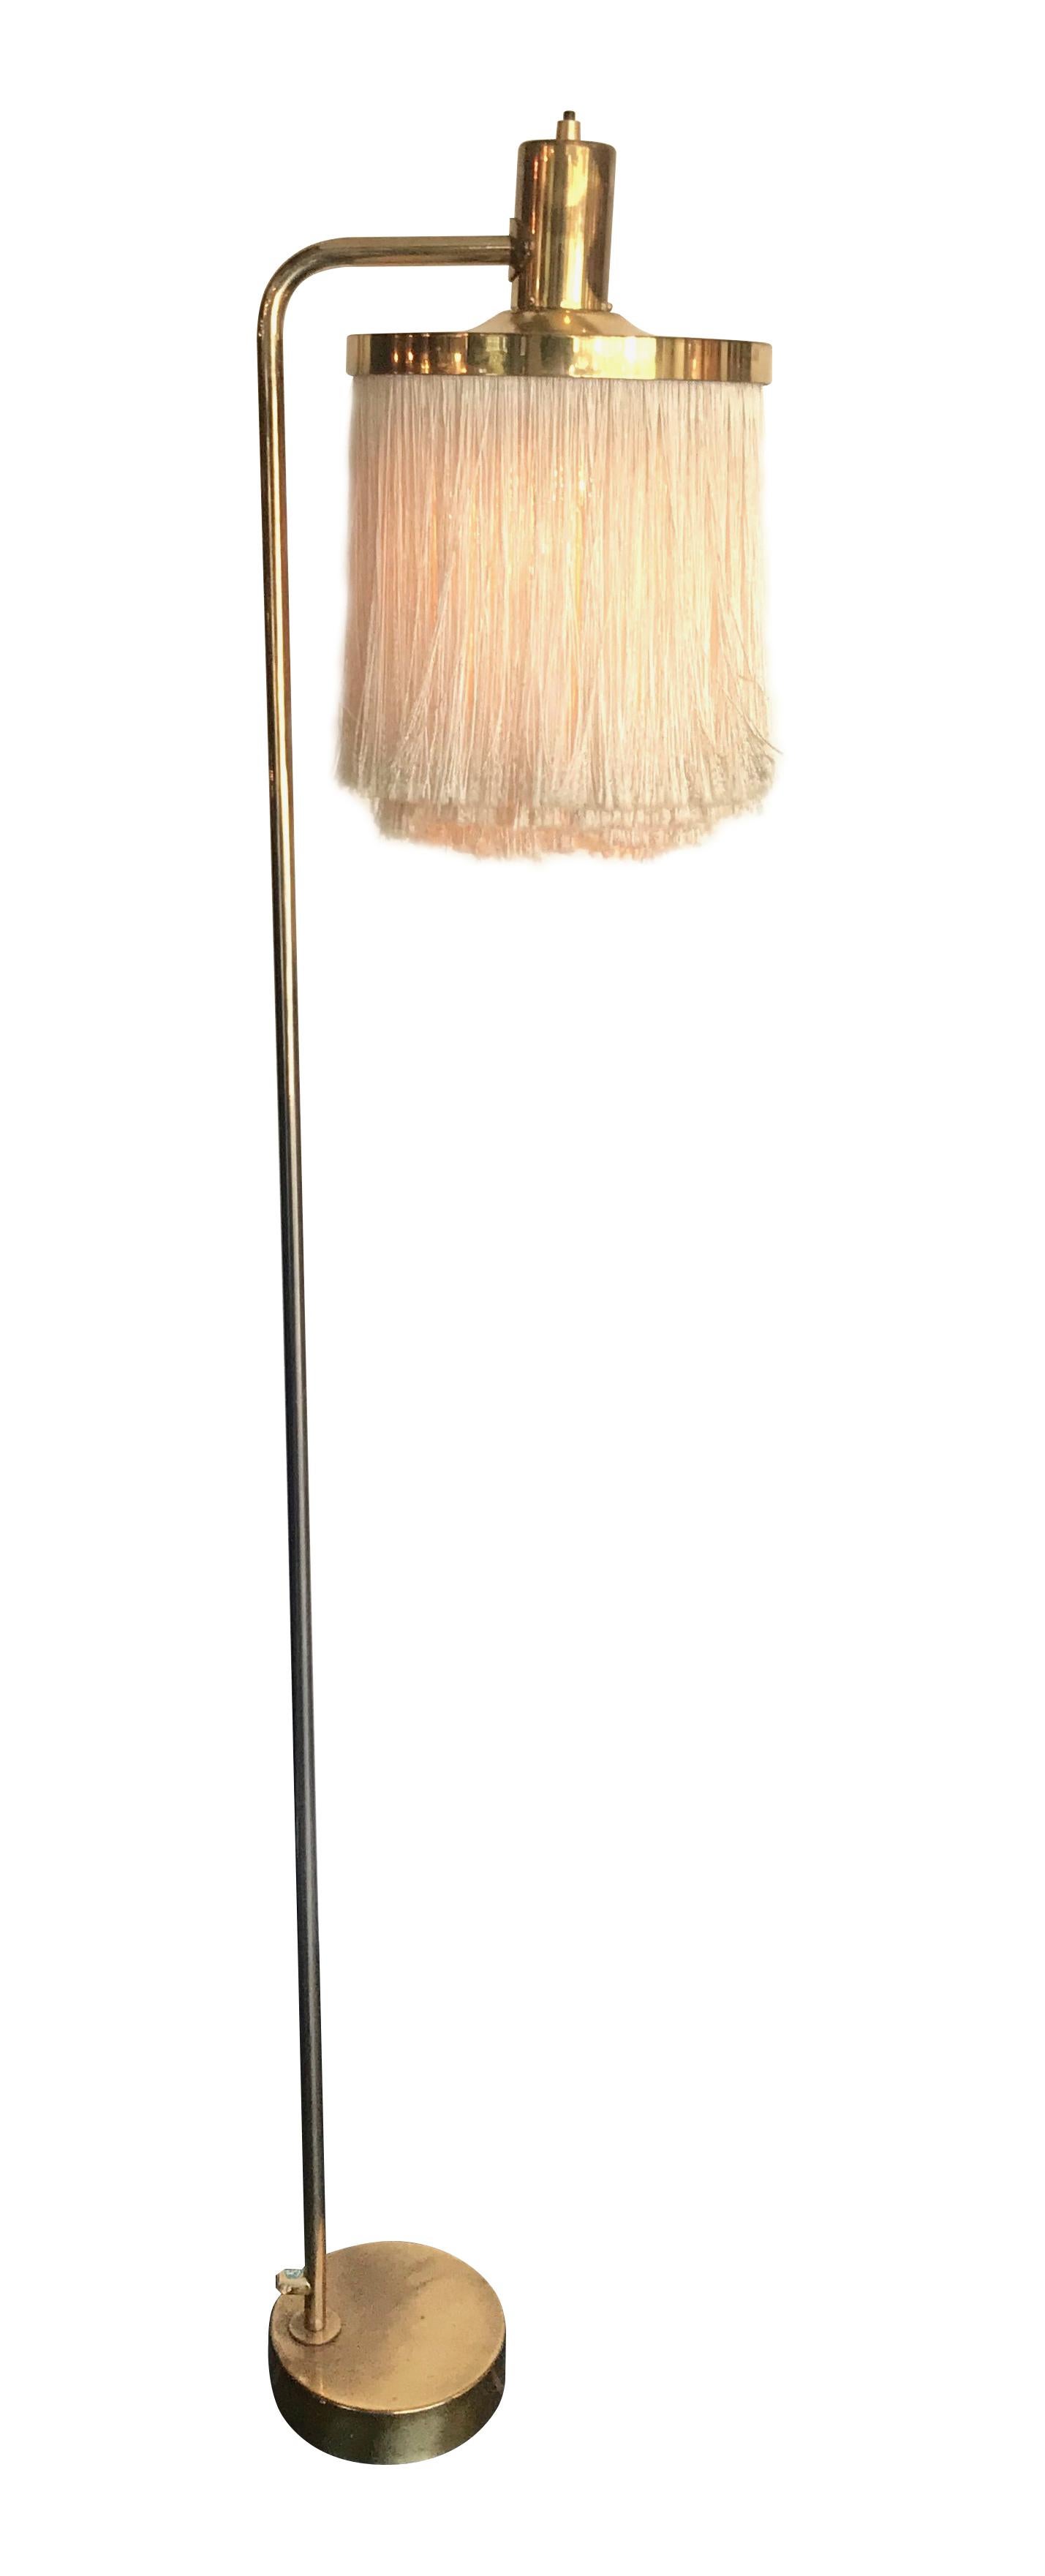 A Hans-Agne Jakobsson silk tasselled brass floor lamp. This is the rare G-109 model and has been re-wired with new fittings, antique gold cord flex and PAT tested.